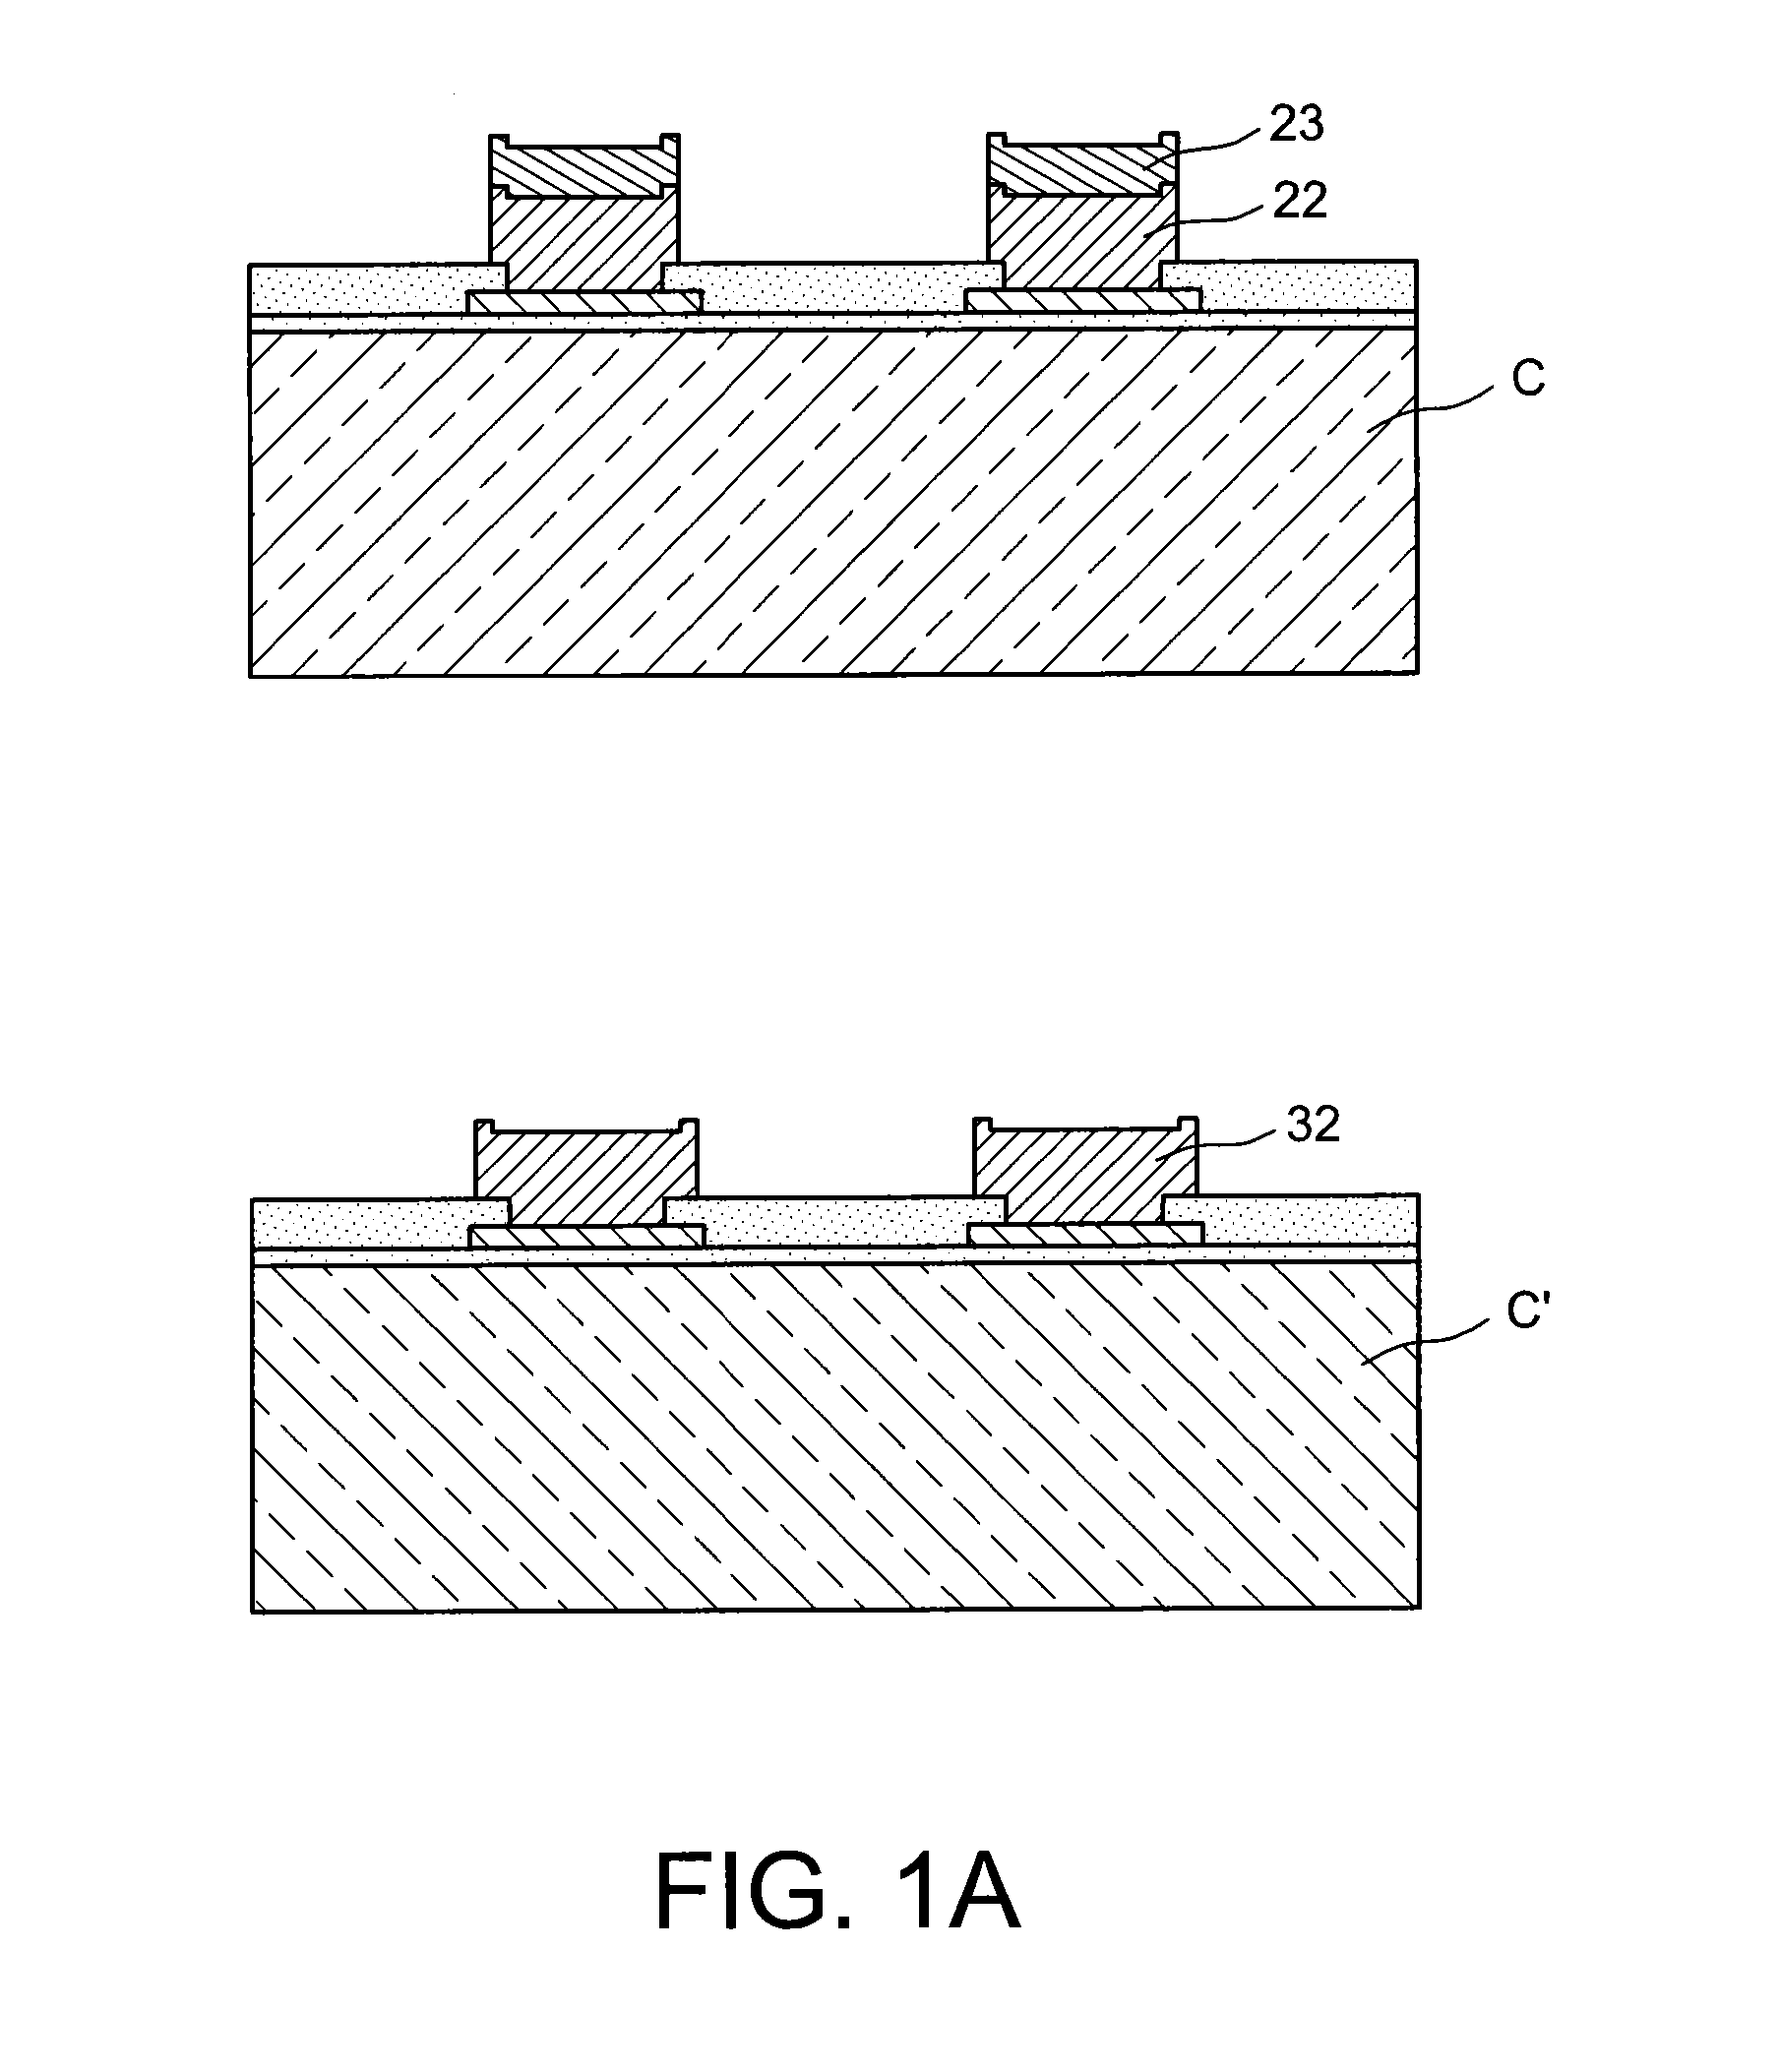 Method for producing a structure for microelectronic device assembly